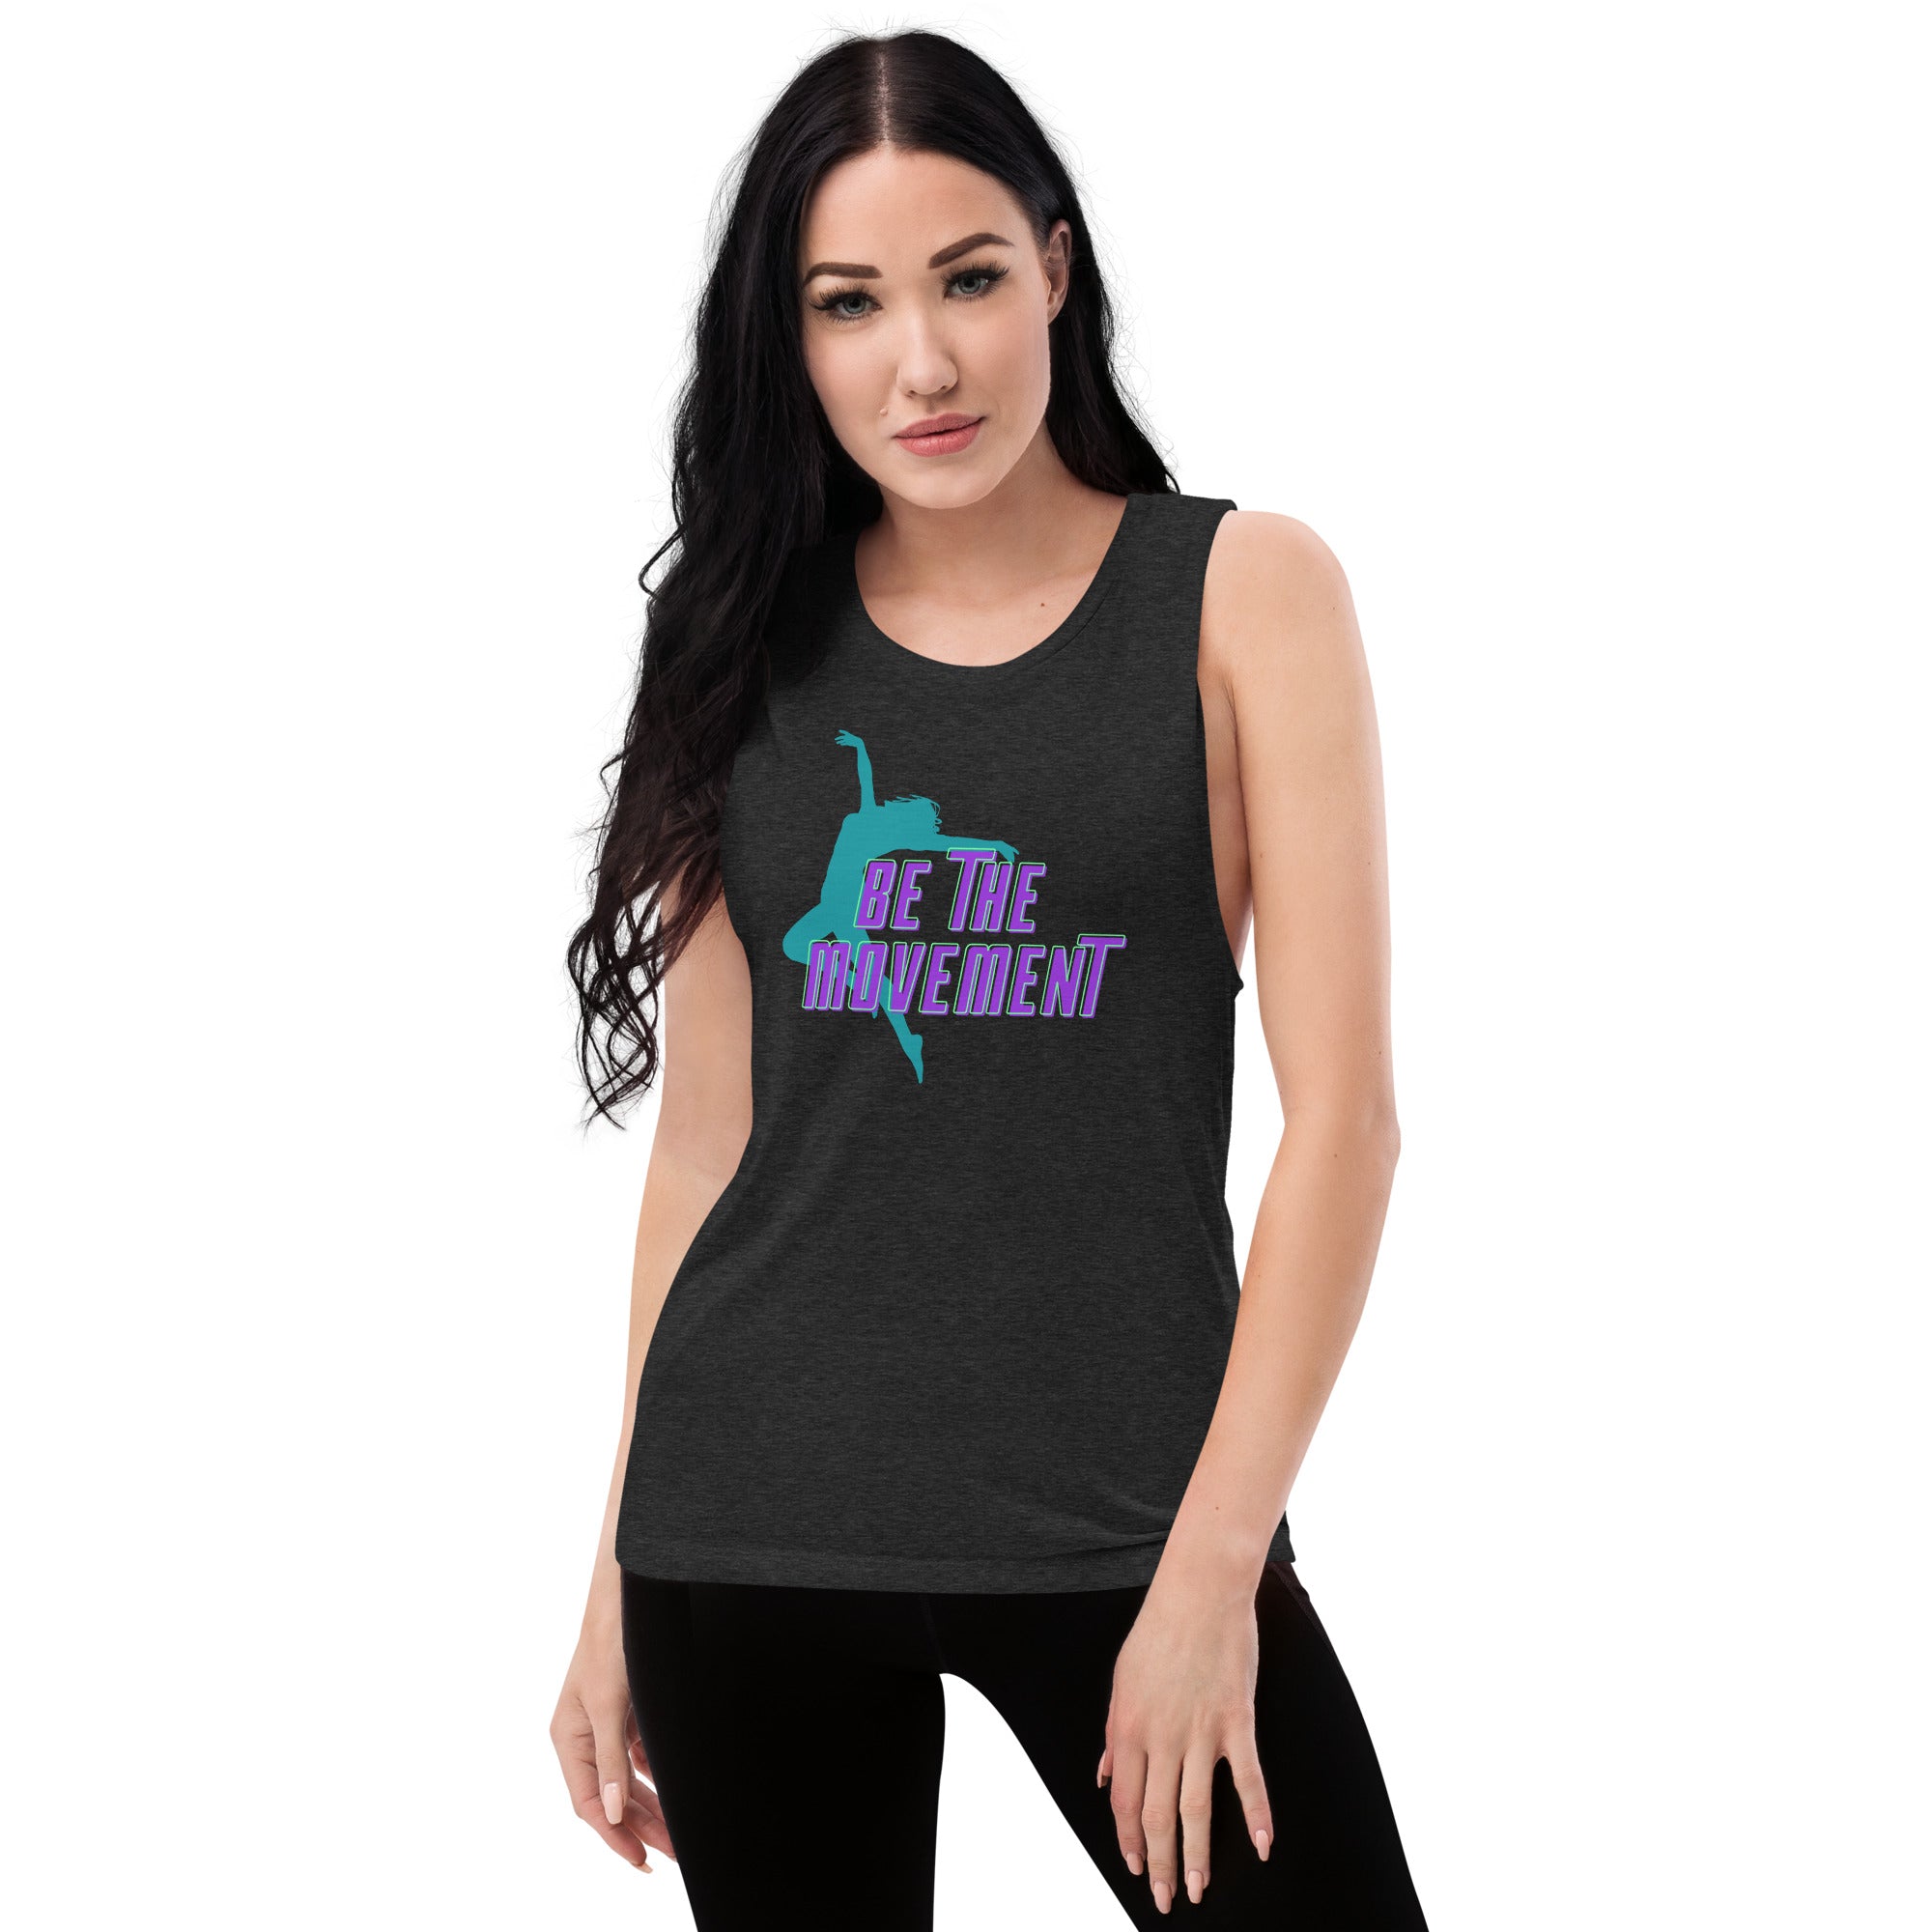 Be The Movement Women's Muscle Tank